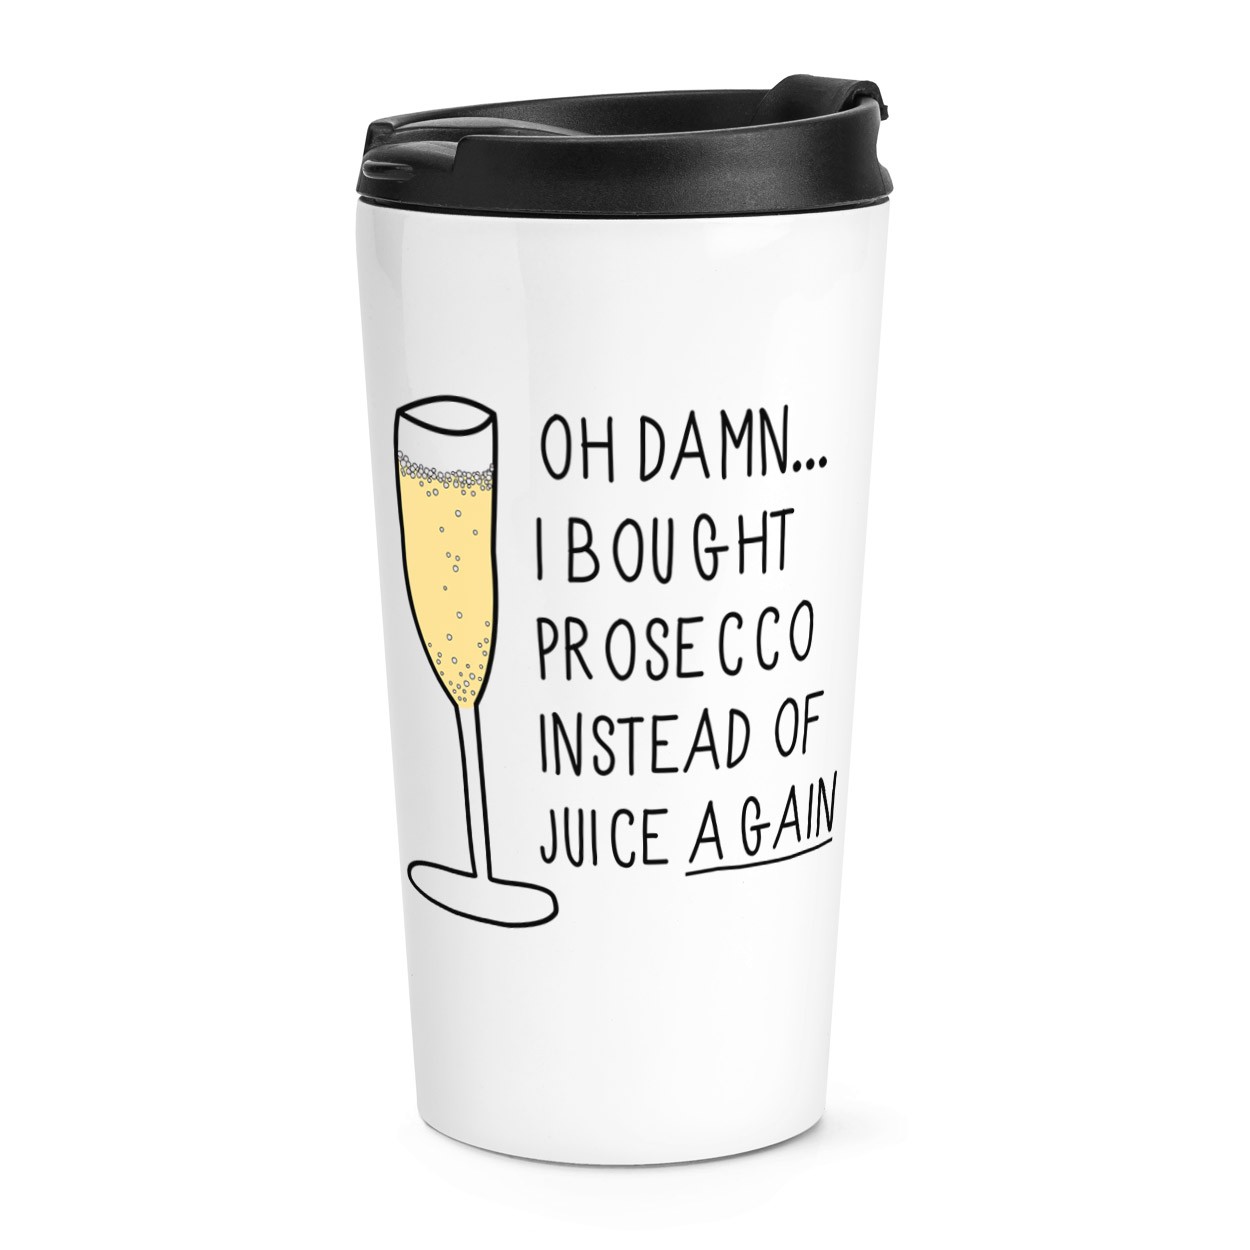 Oh Damn I Bought Prosecco Instead Of Juice Again Travel Mug Cup